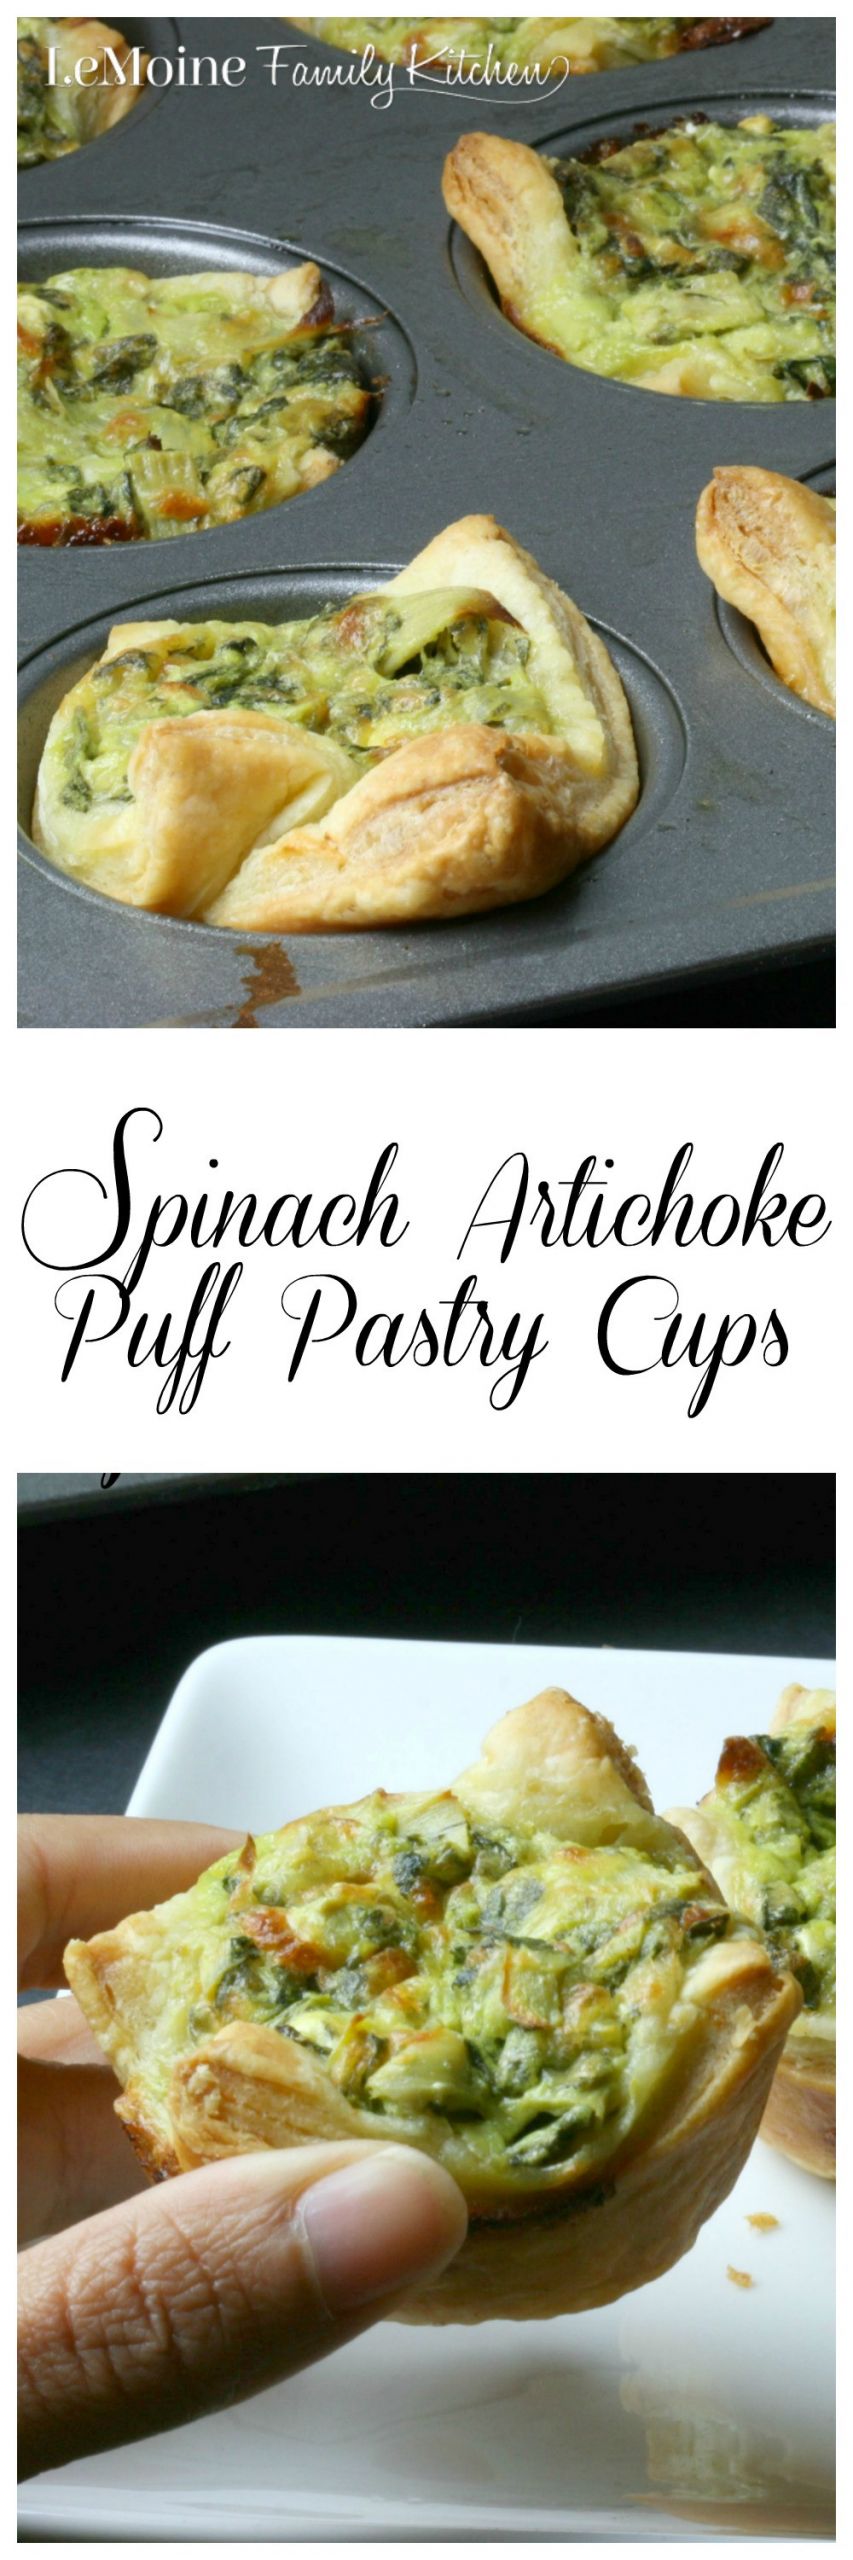 Appetizers With Puff Pastry Sheets
 Spinach Artichoke Puff Pastry Cups LeMoine Family Kitchen